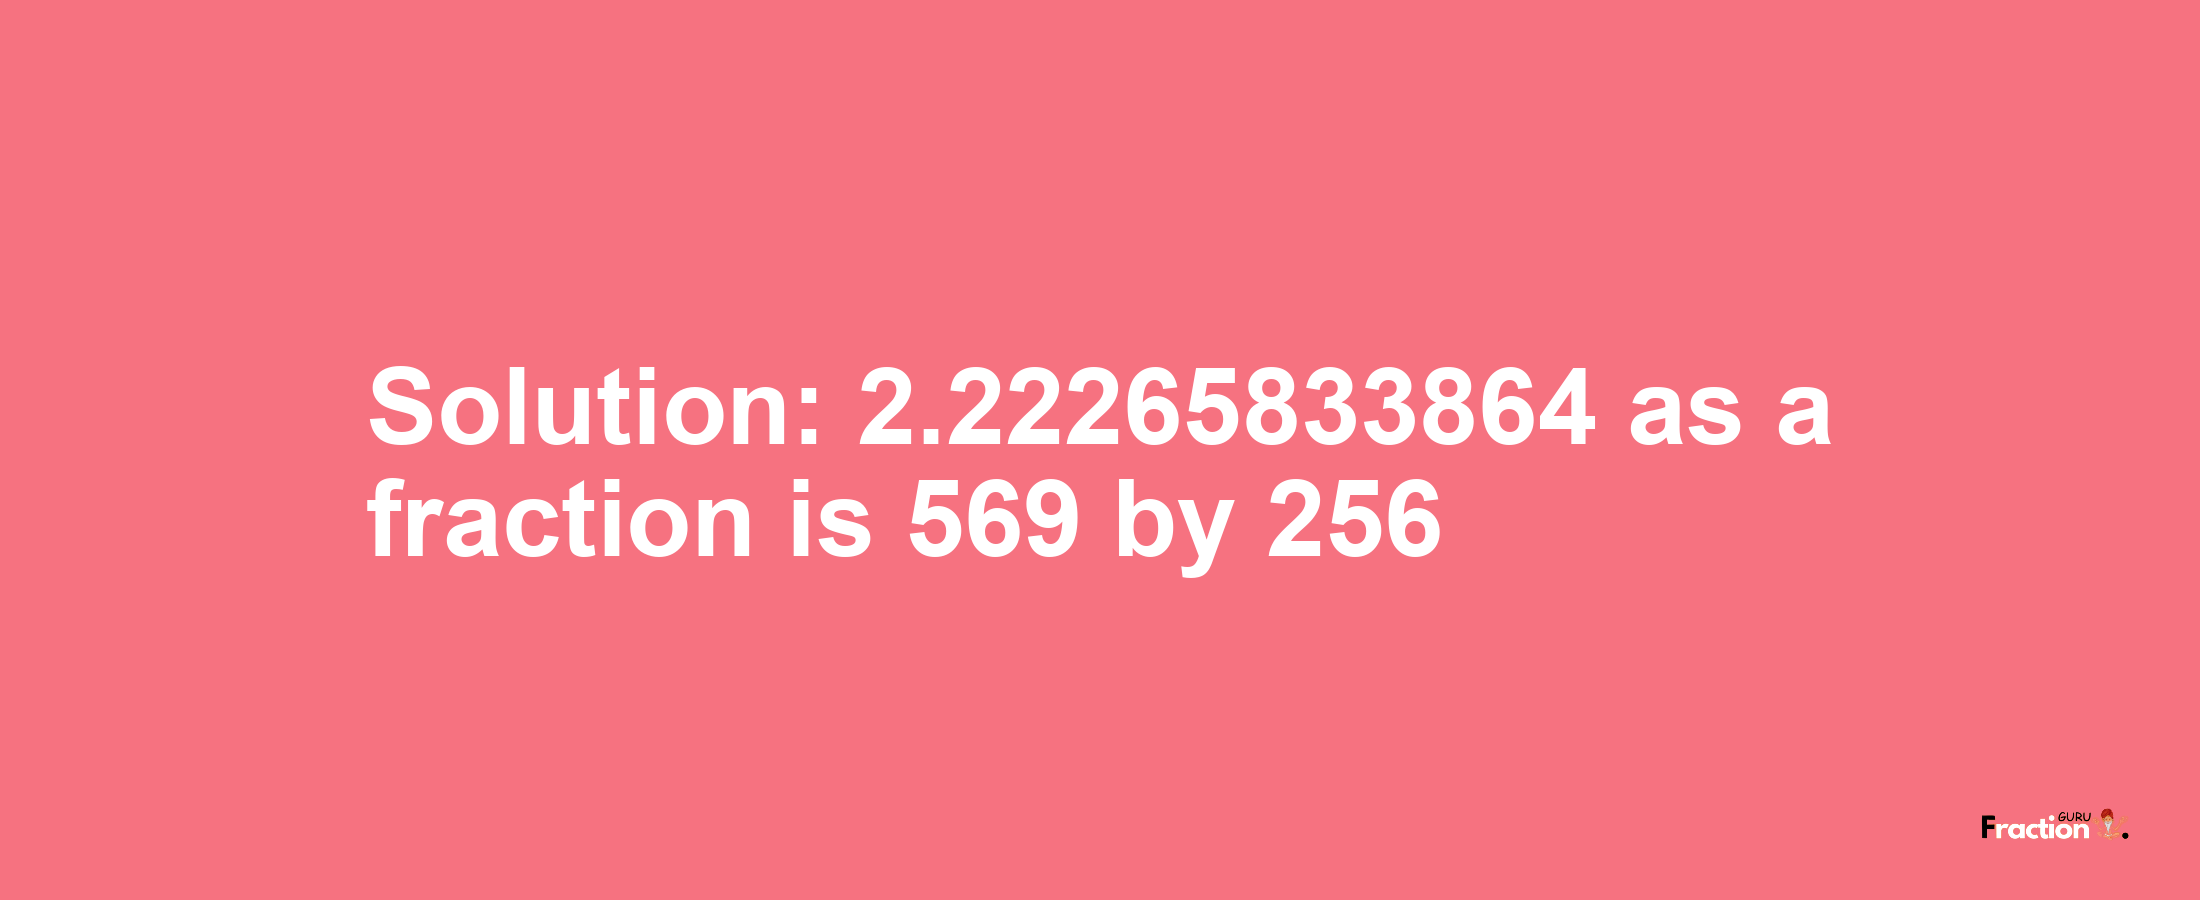 Solution:2.22265833864 as a fraction is 569/256